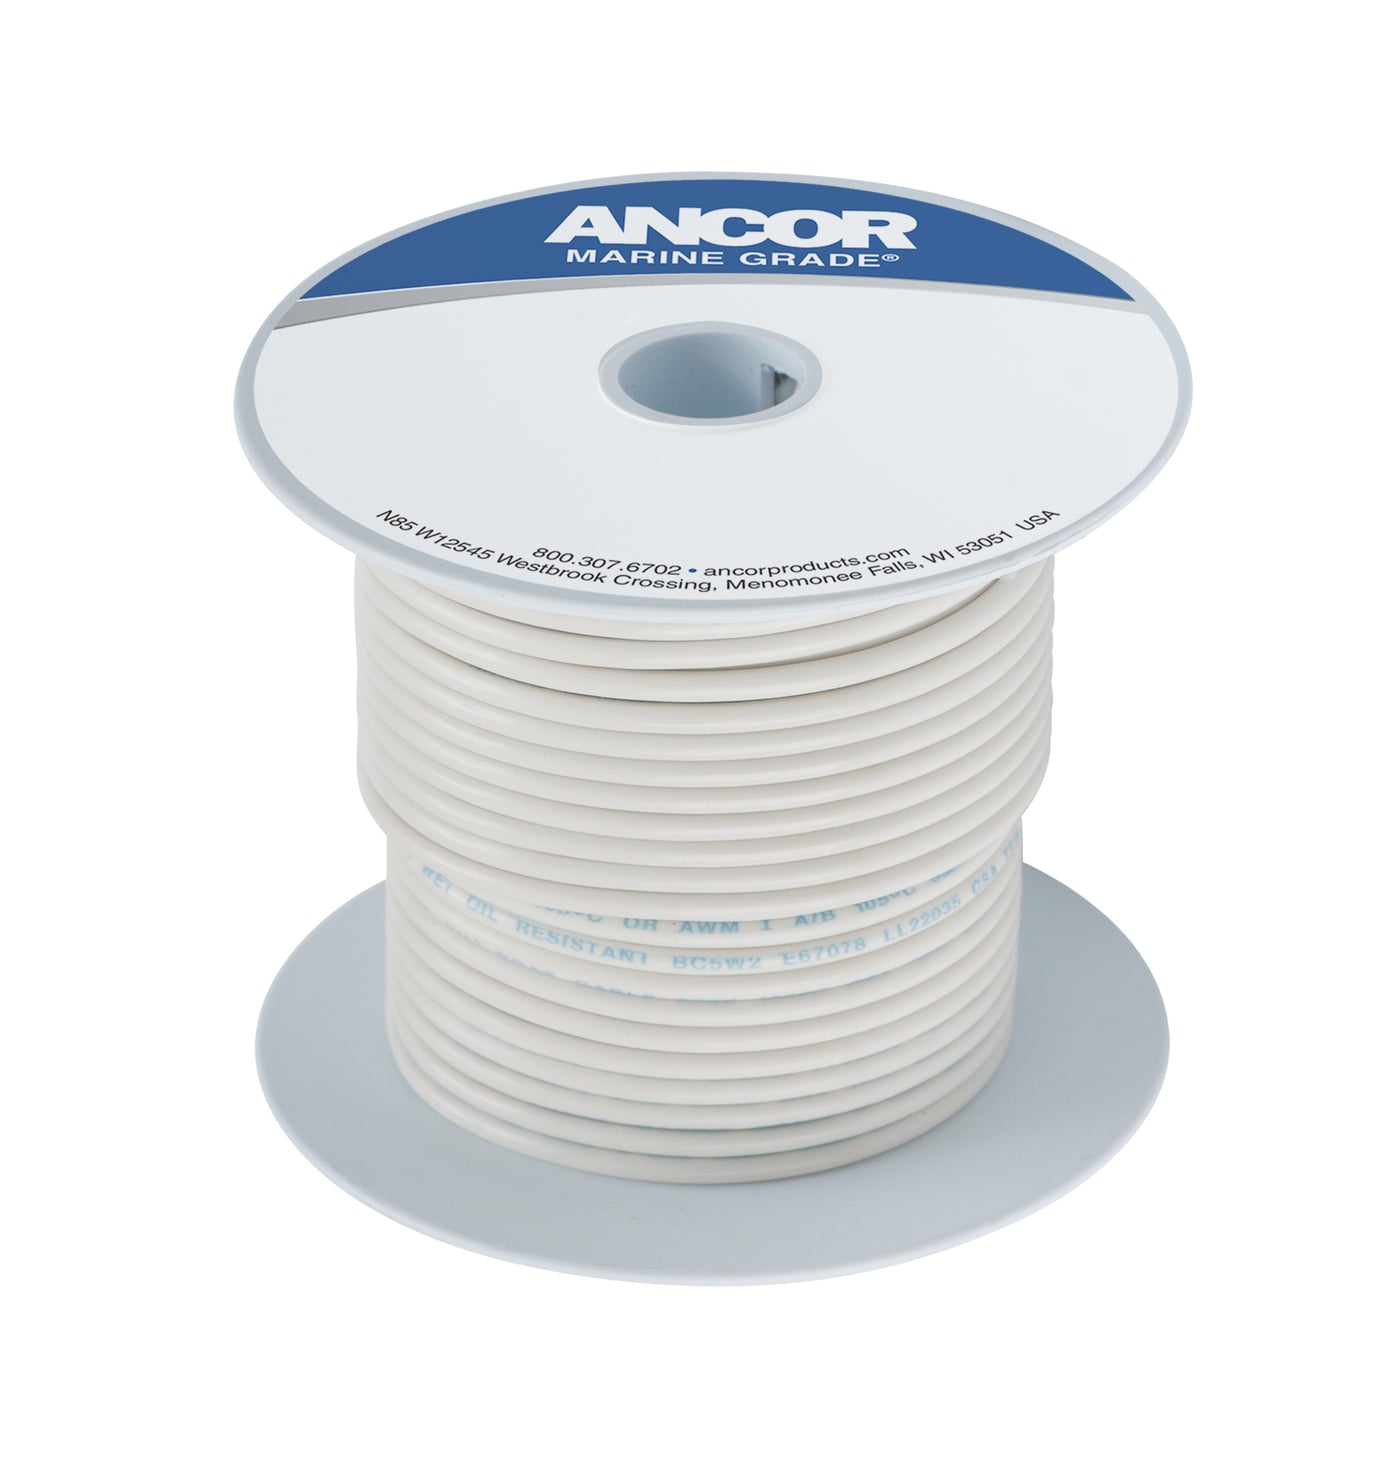 Ancor 111725 Tinned Copper Wire, 8 AWG (8mm²), White - 250ft